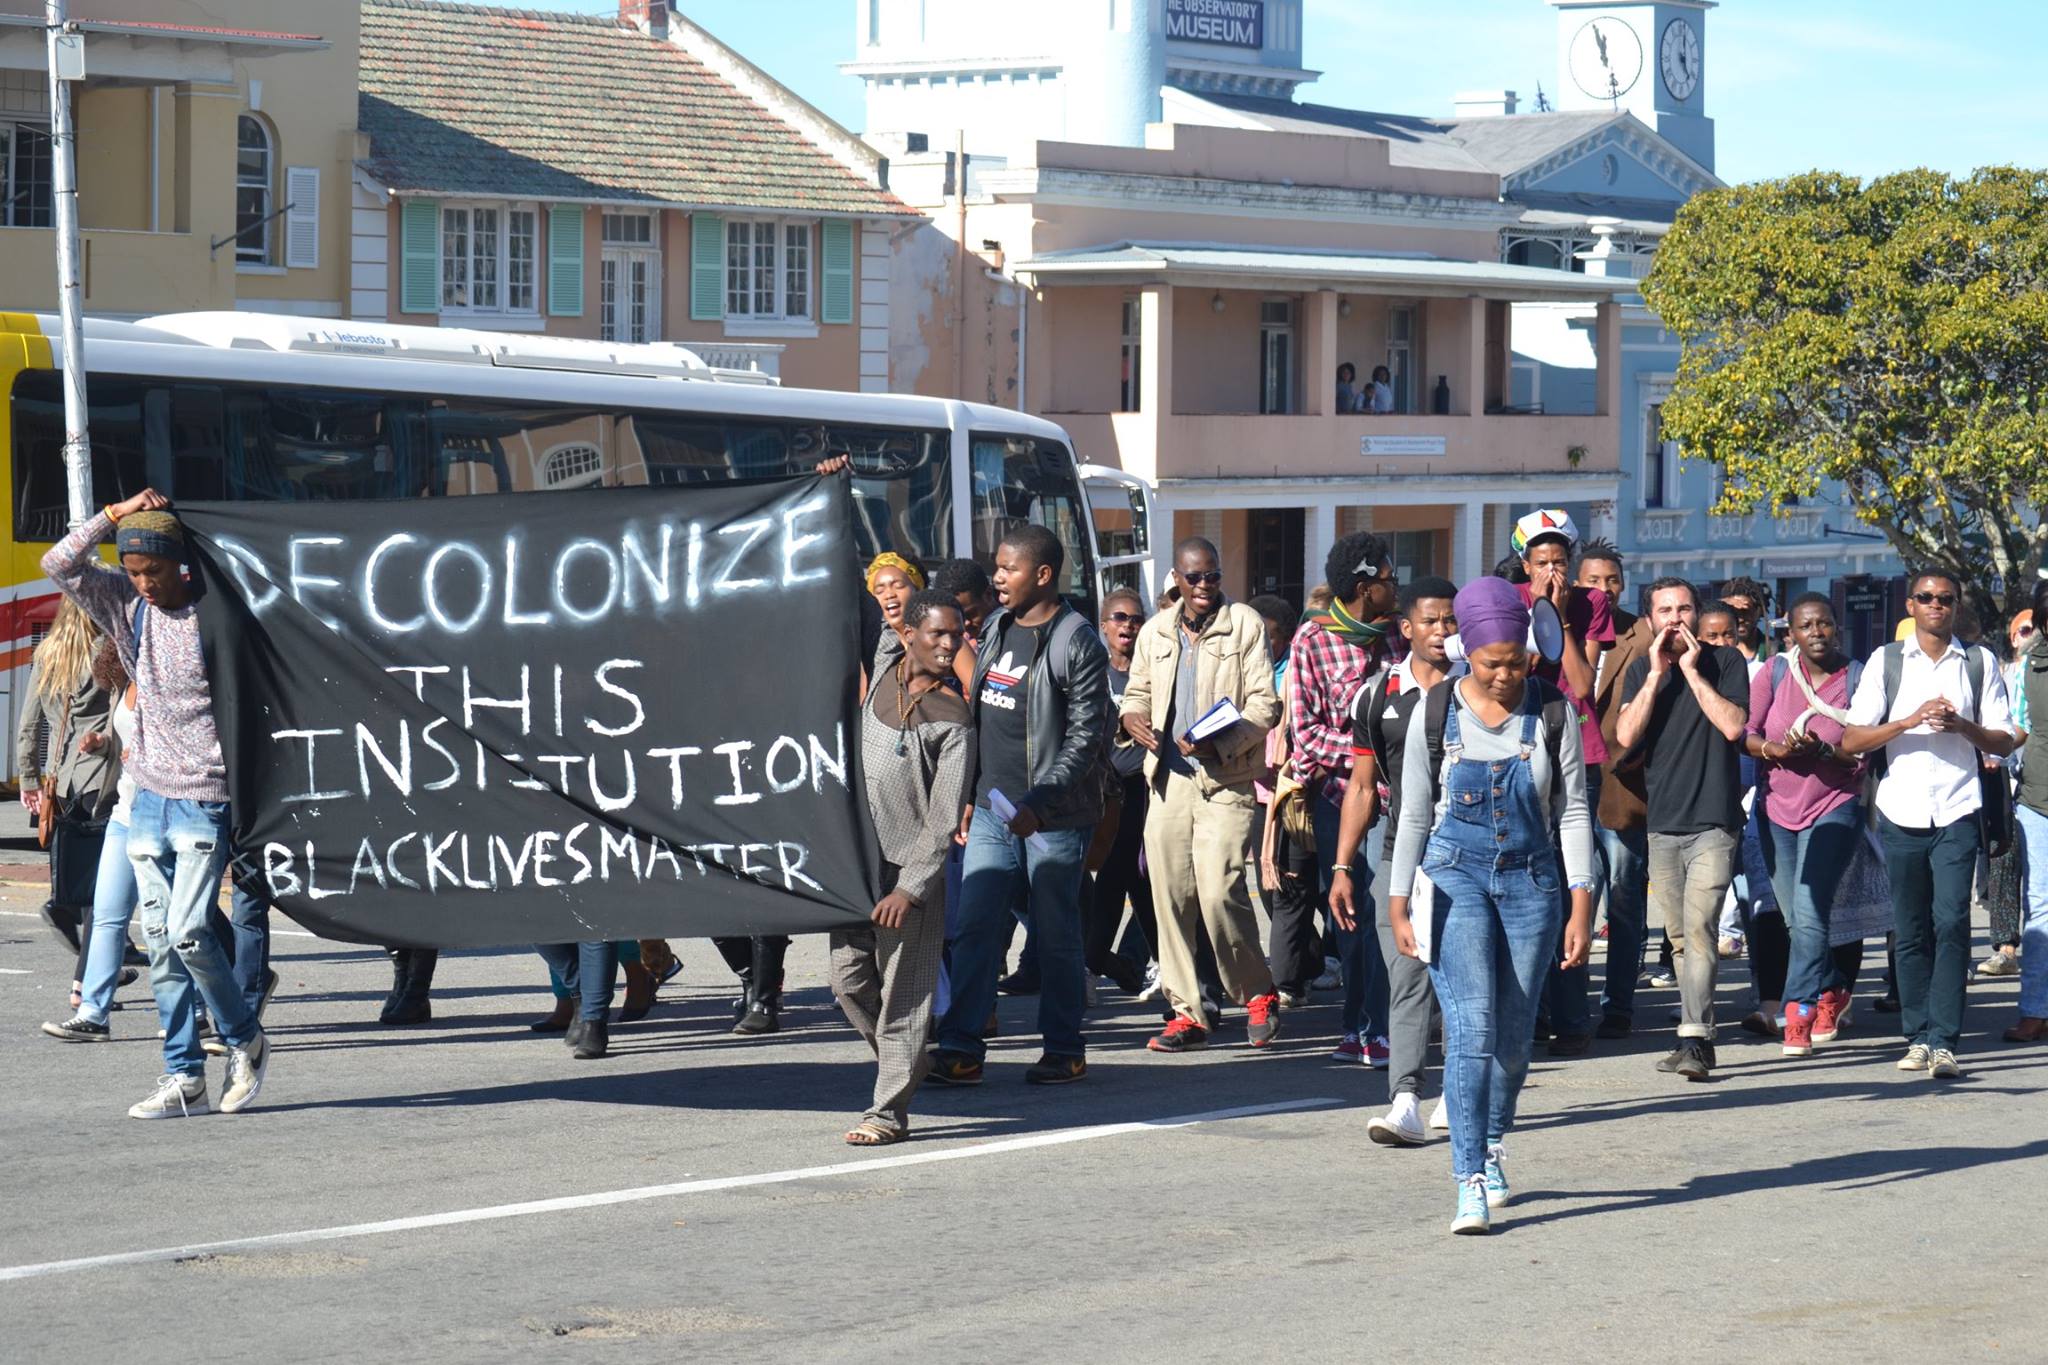 BSM protests in Grahamstown image by Xolile Madinda